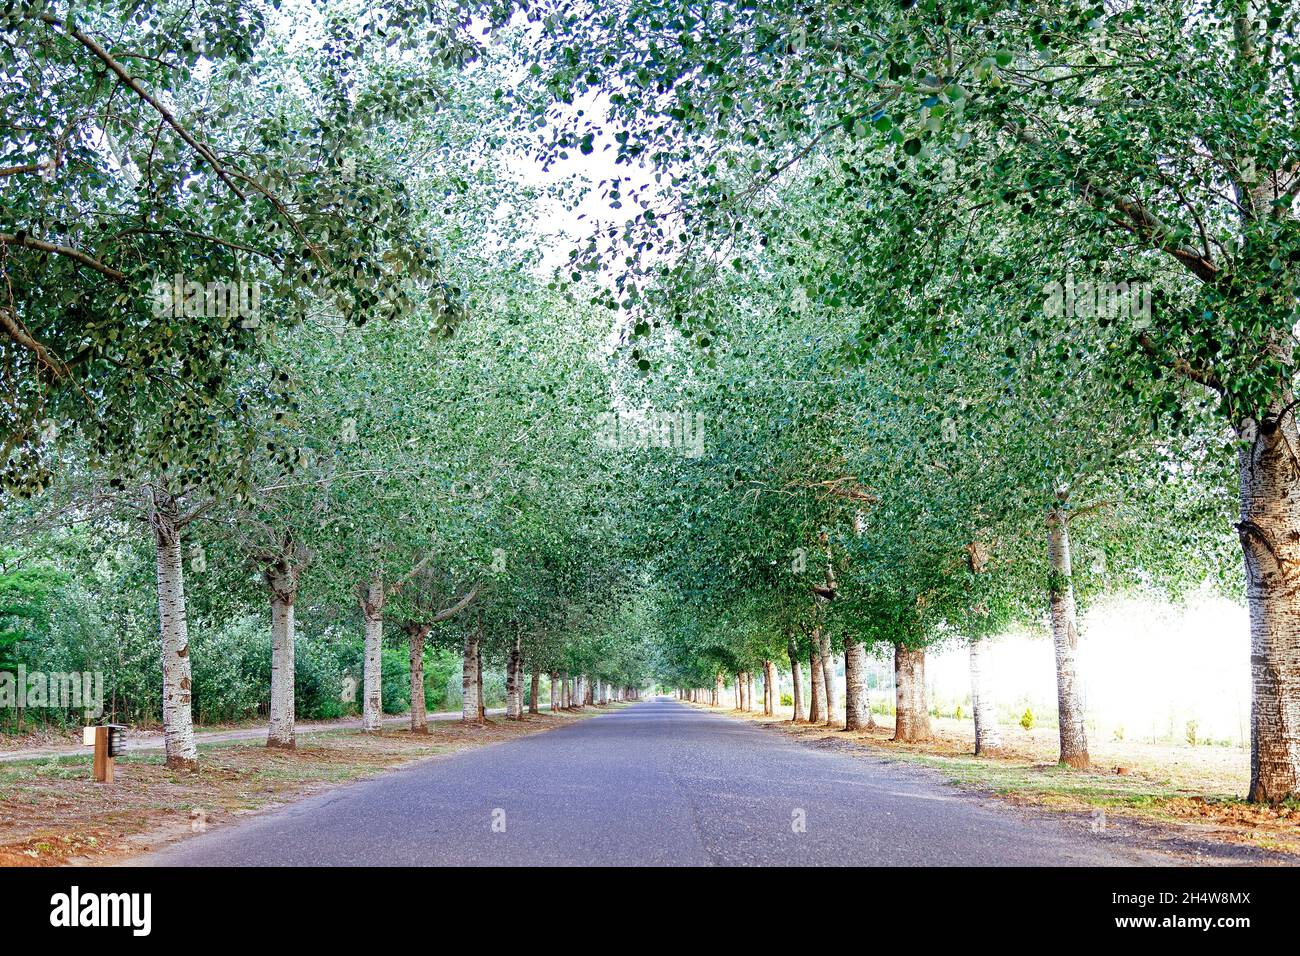 Deserted road with a tunnel of trees. Stock Photo